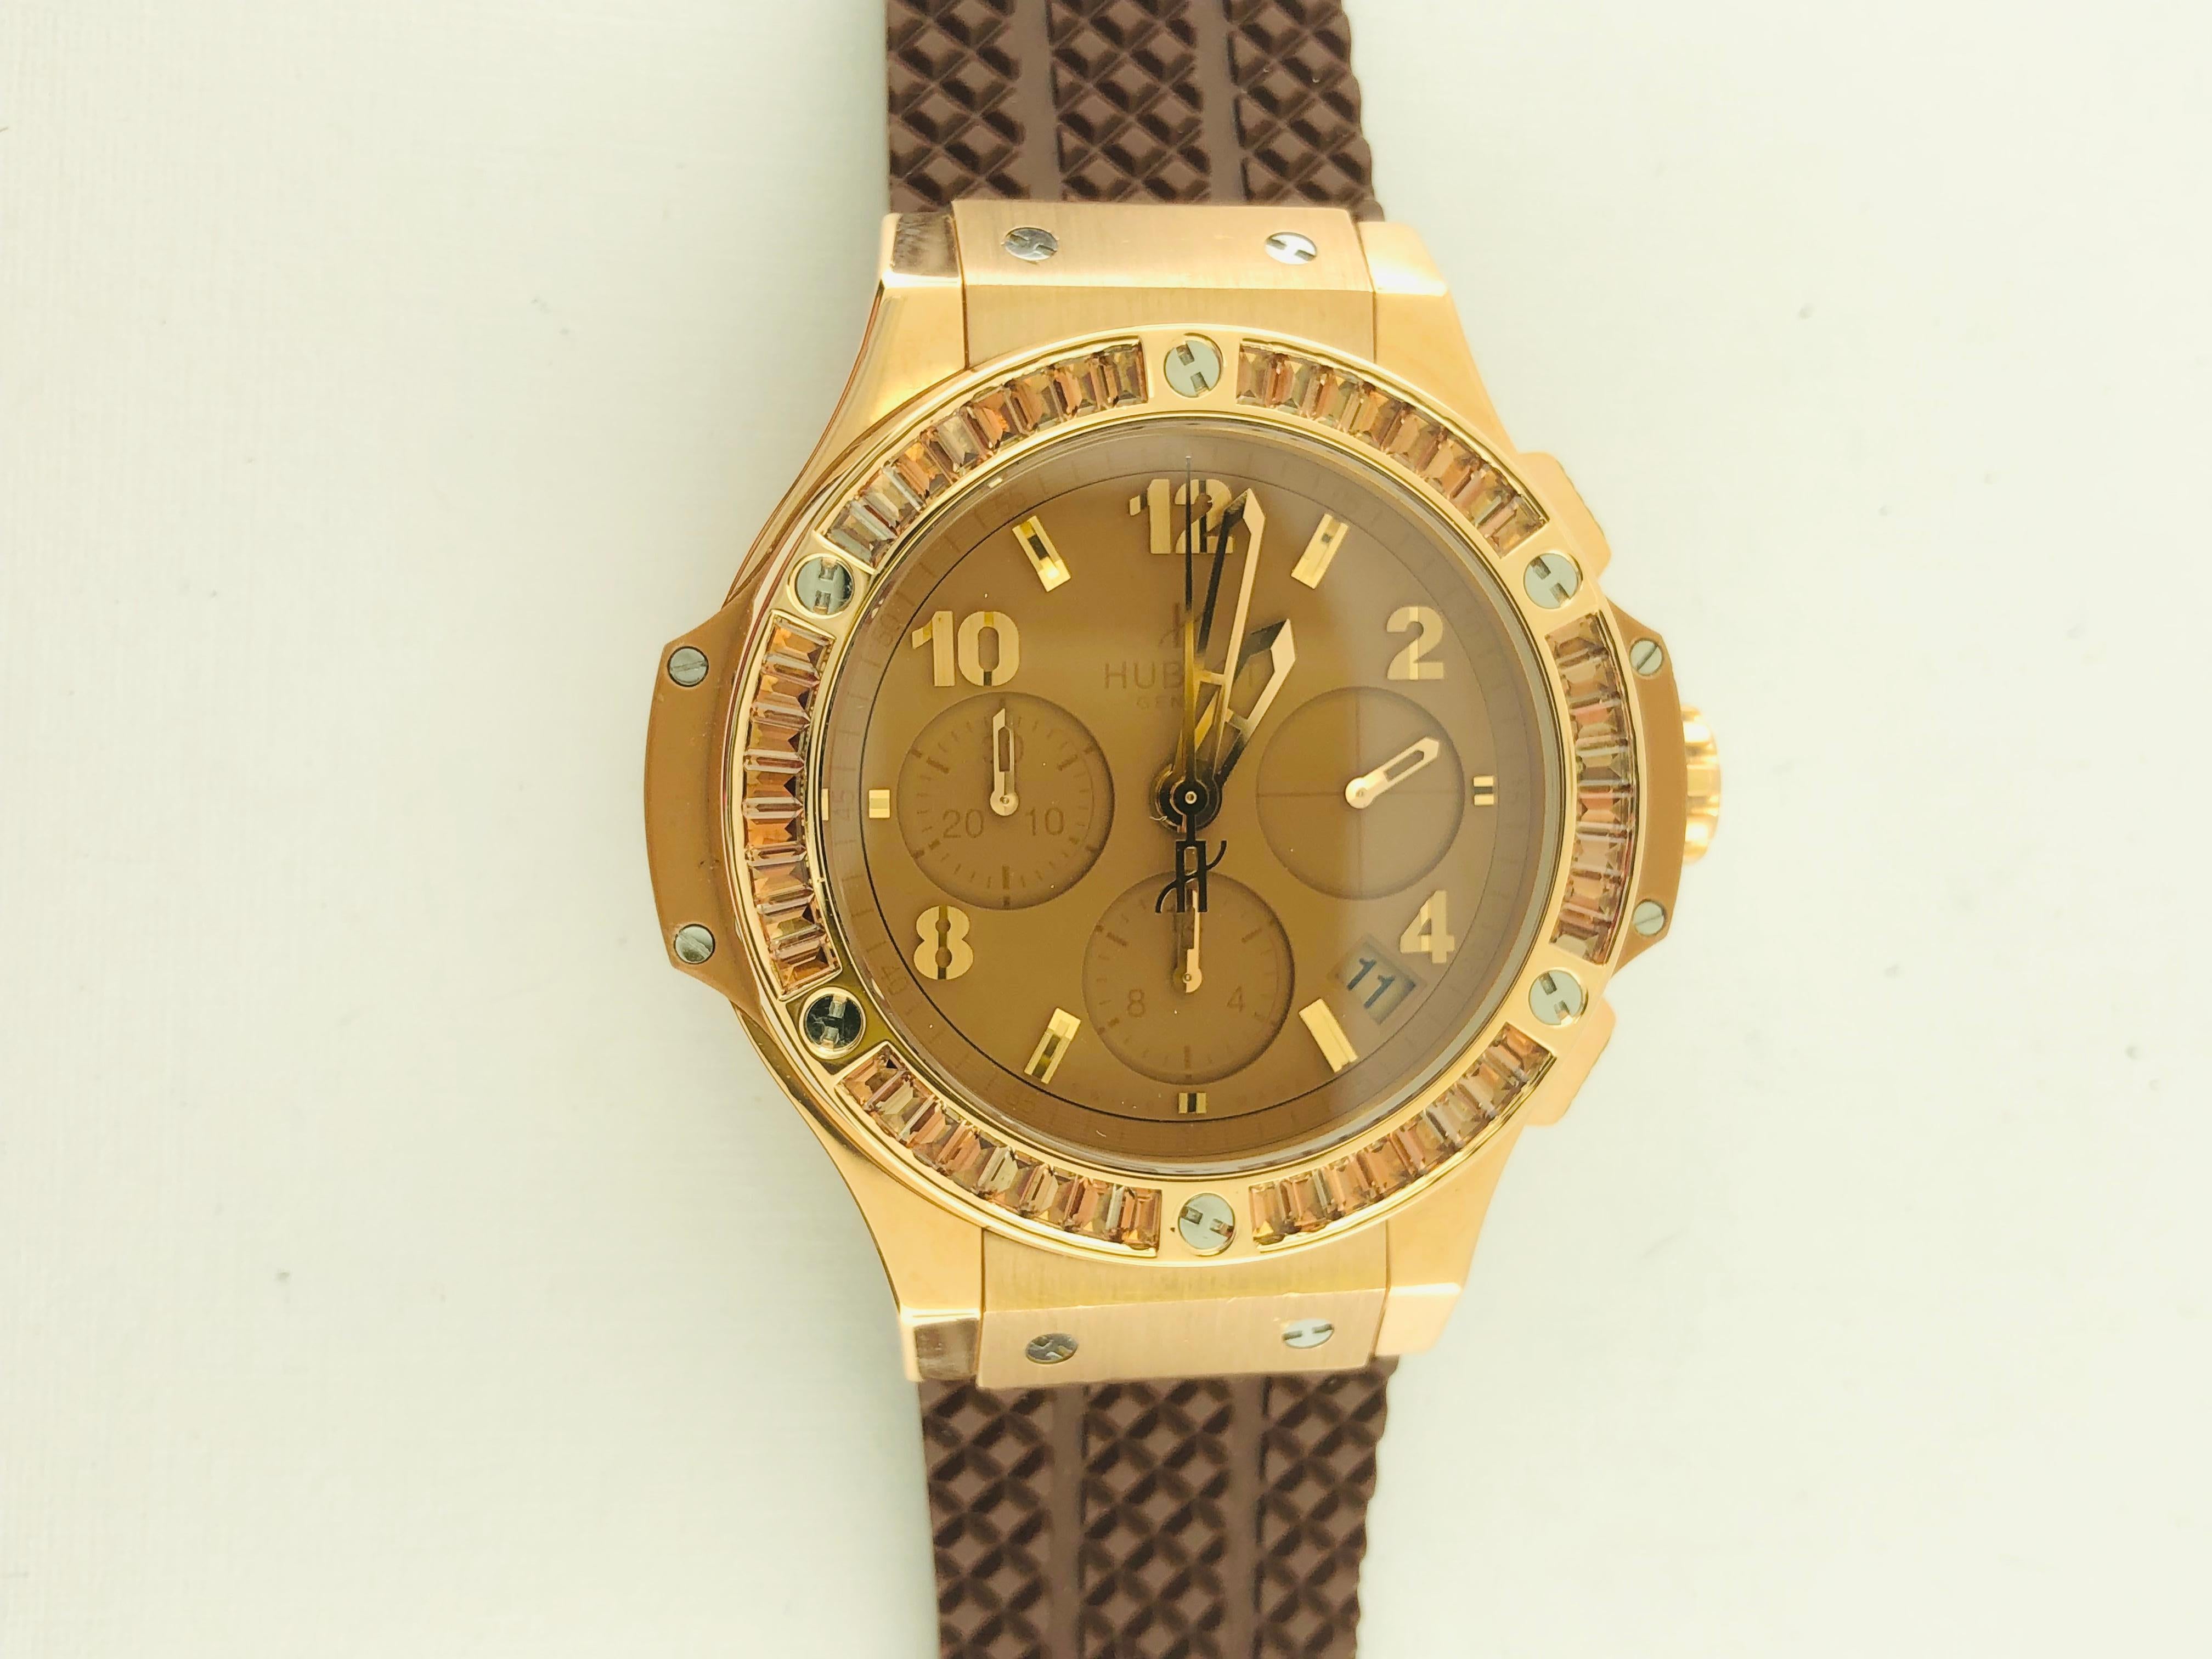 Hublot Big Bang Tutti Frutti Camel

Reference Number: 341.PA.5390.LR.1918

No Box or Papers

Bracelet: Brown Rubber Band (Not original band on watch, new one)

Movement: Automatic

Case: 41 millimeters

In Excellent Pre-Owned Condition

124 Years In